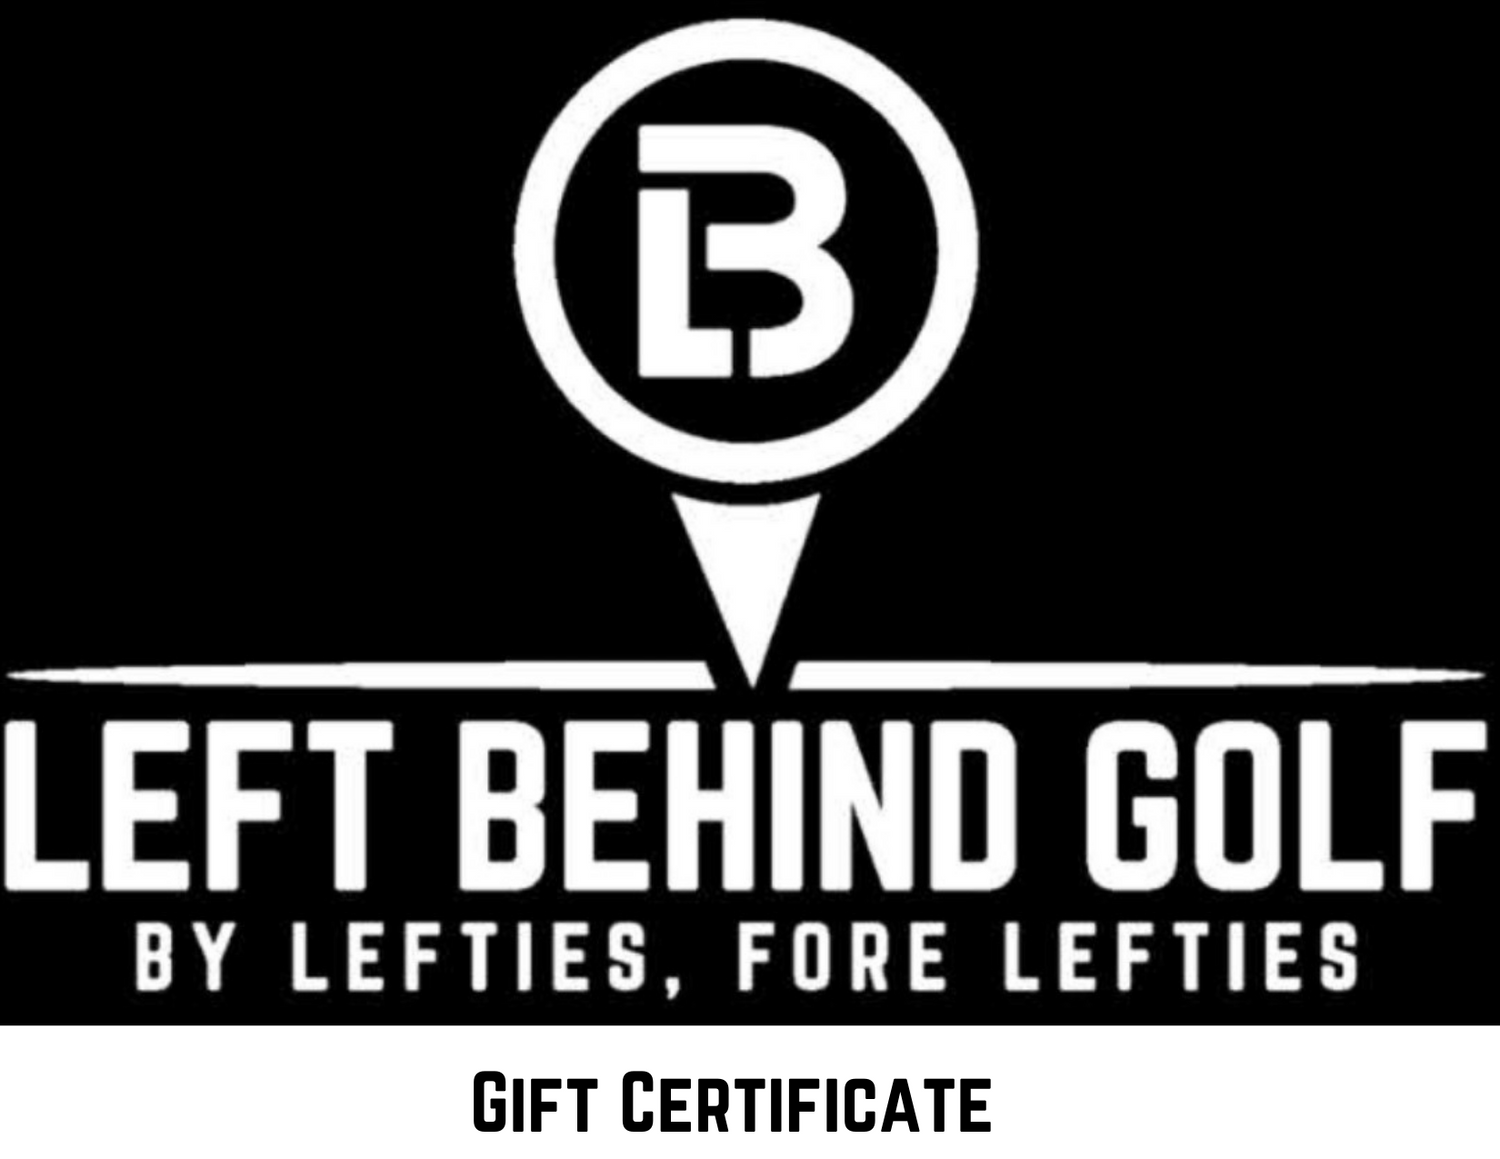 Left Behind Golf Company Gift Certificate